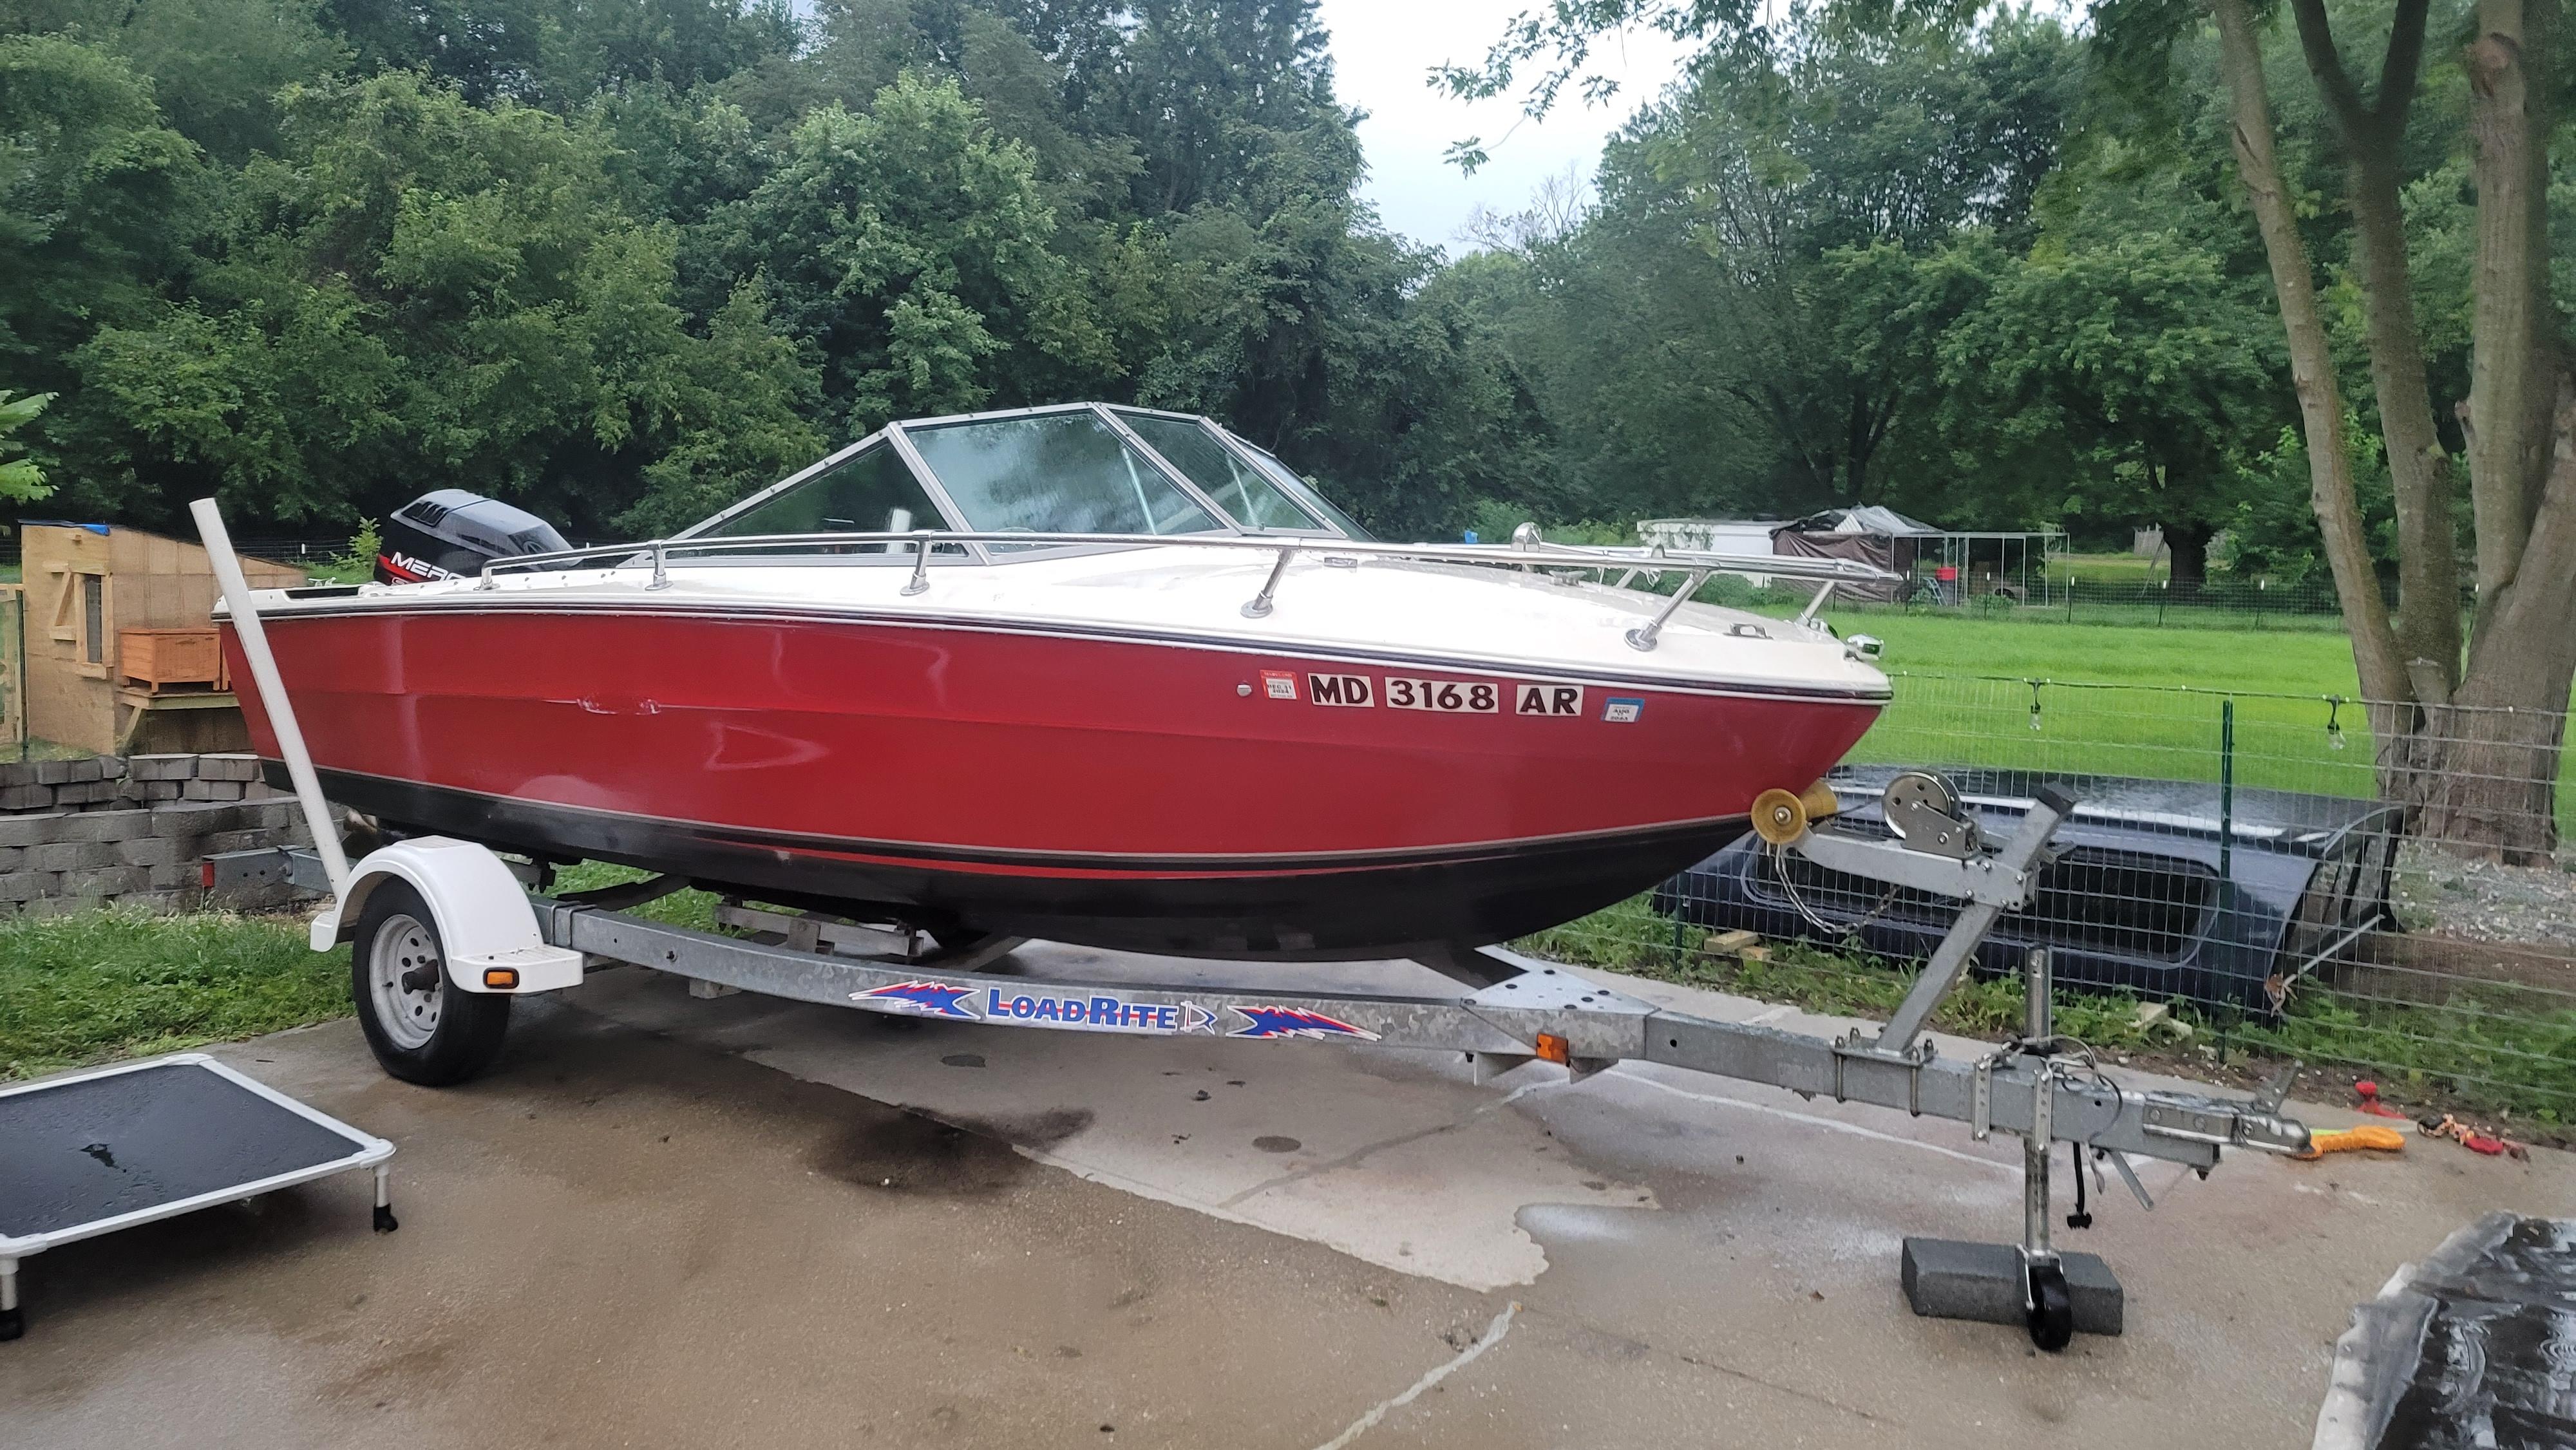 Boats for sale in Chestertown - Boat Trader